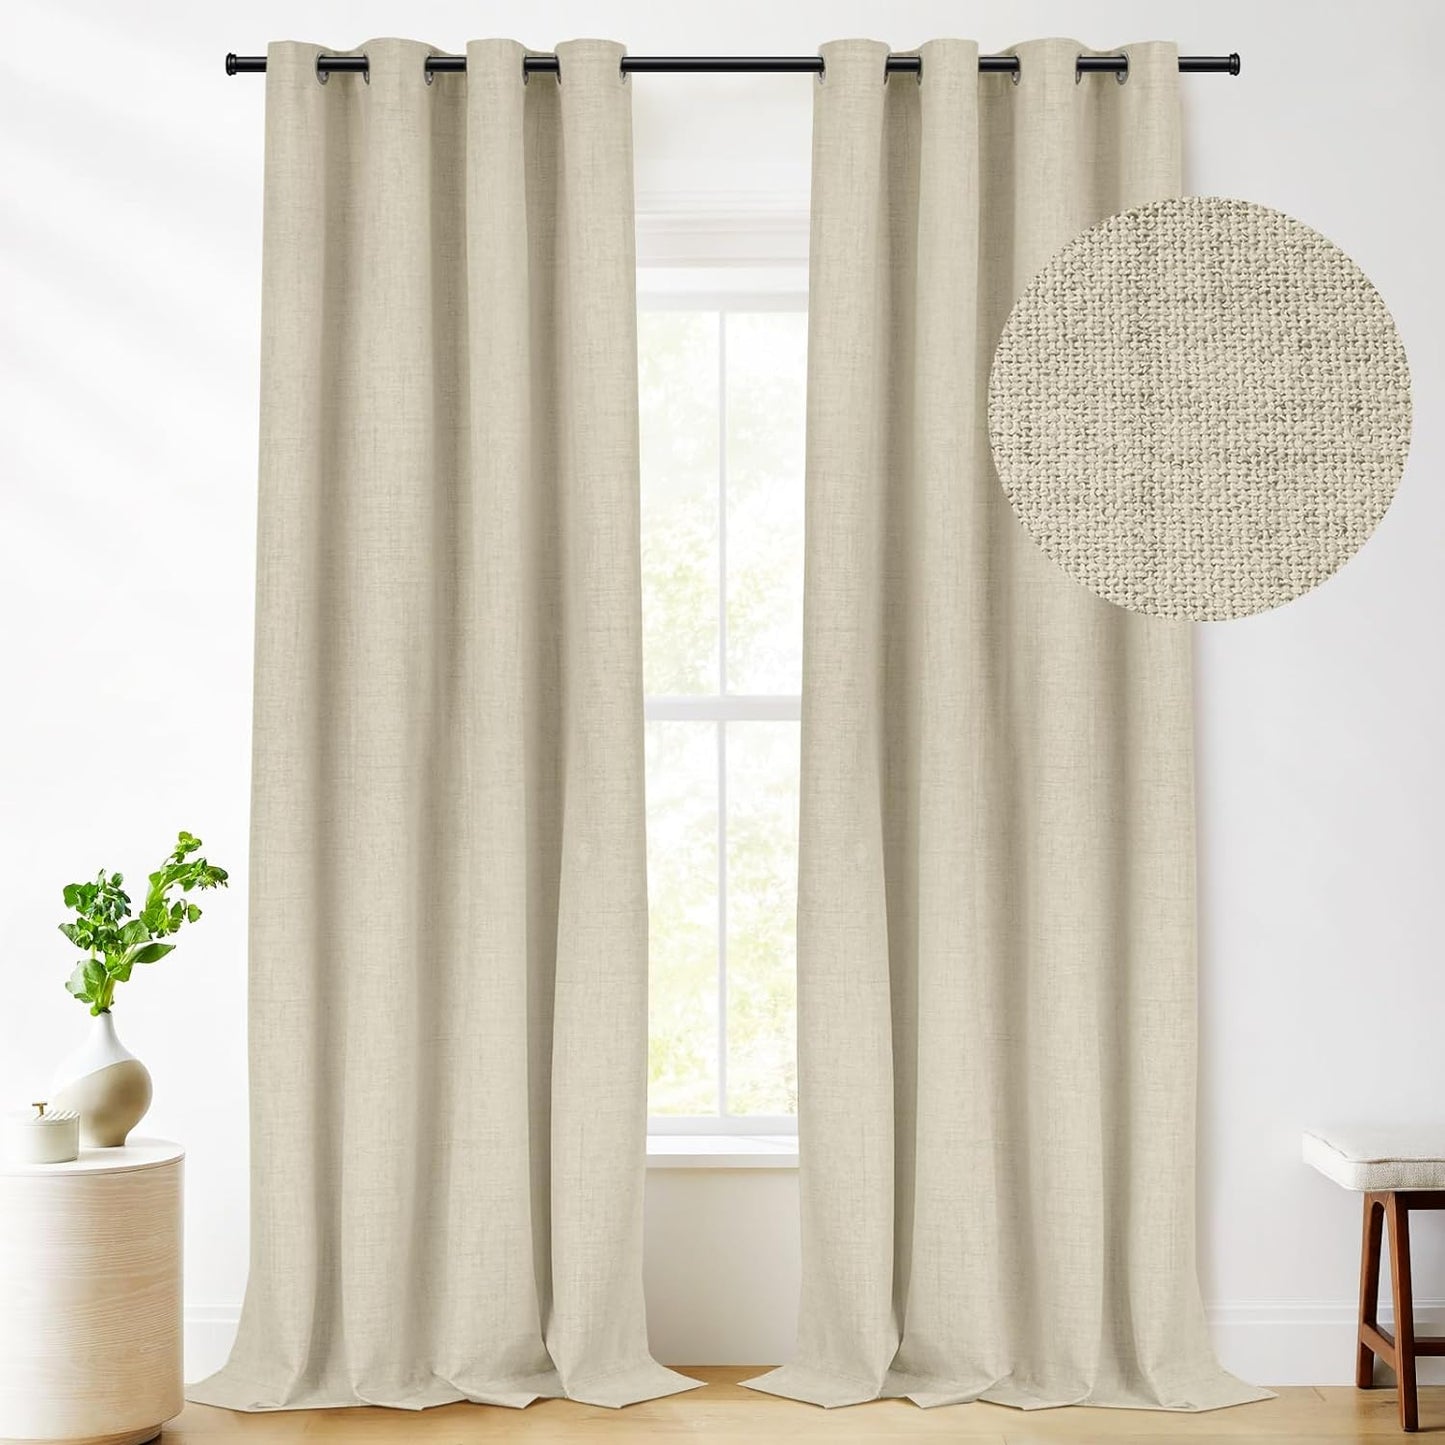 RHF Blackout Curtains 84 Inch Length 2 Panels Set, Primitive Linen Look, 100% Blackout Curtains Linen Black Out Curtains for Bedroom Windows, Burlap Grommet Curtains-(50X84, Oatmeal)  Rose Home Fashion Natural Flax W50 X L96 